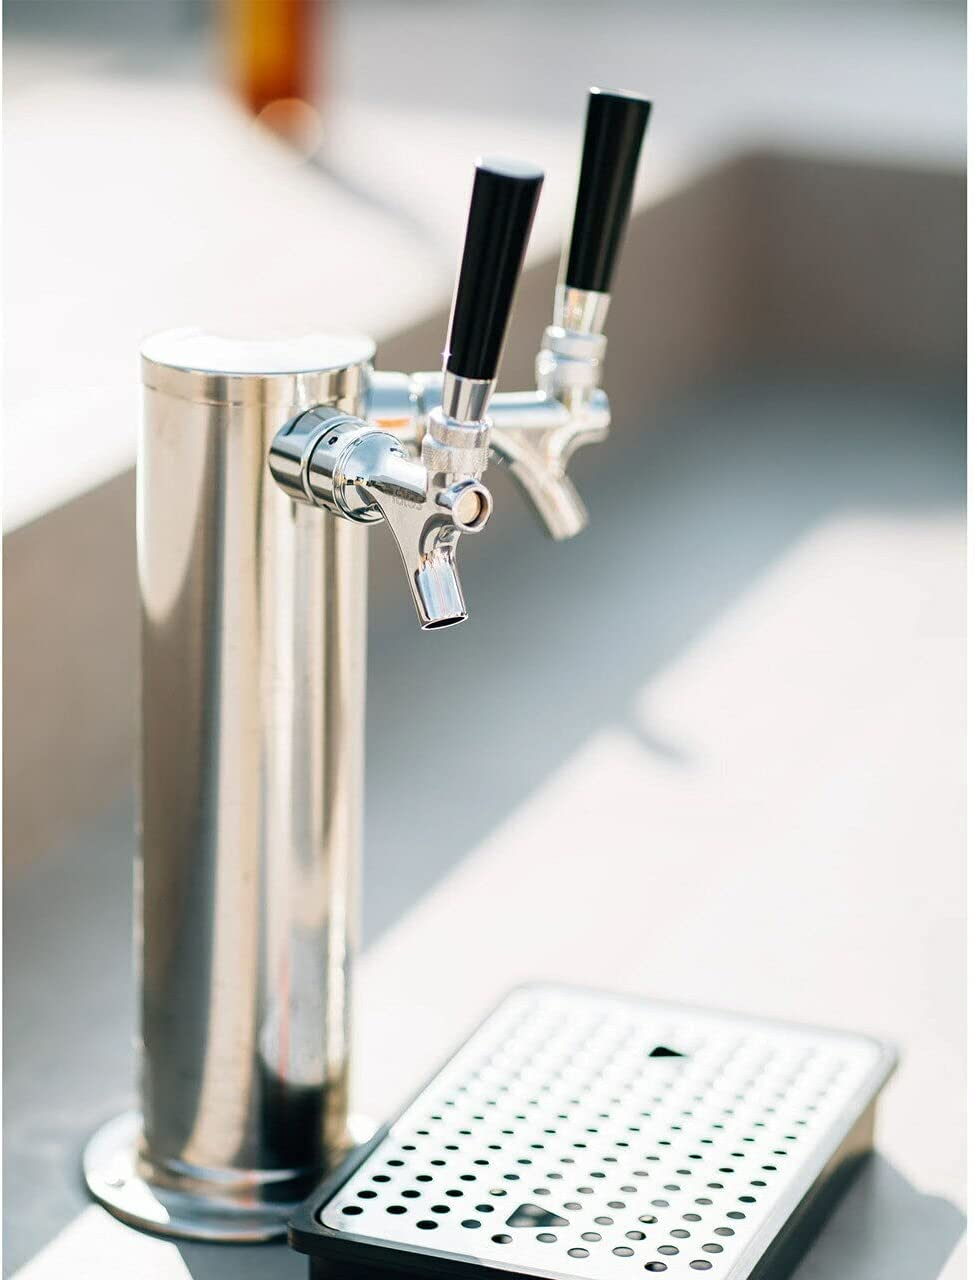 tmcraft beer tower dispenser details page products details